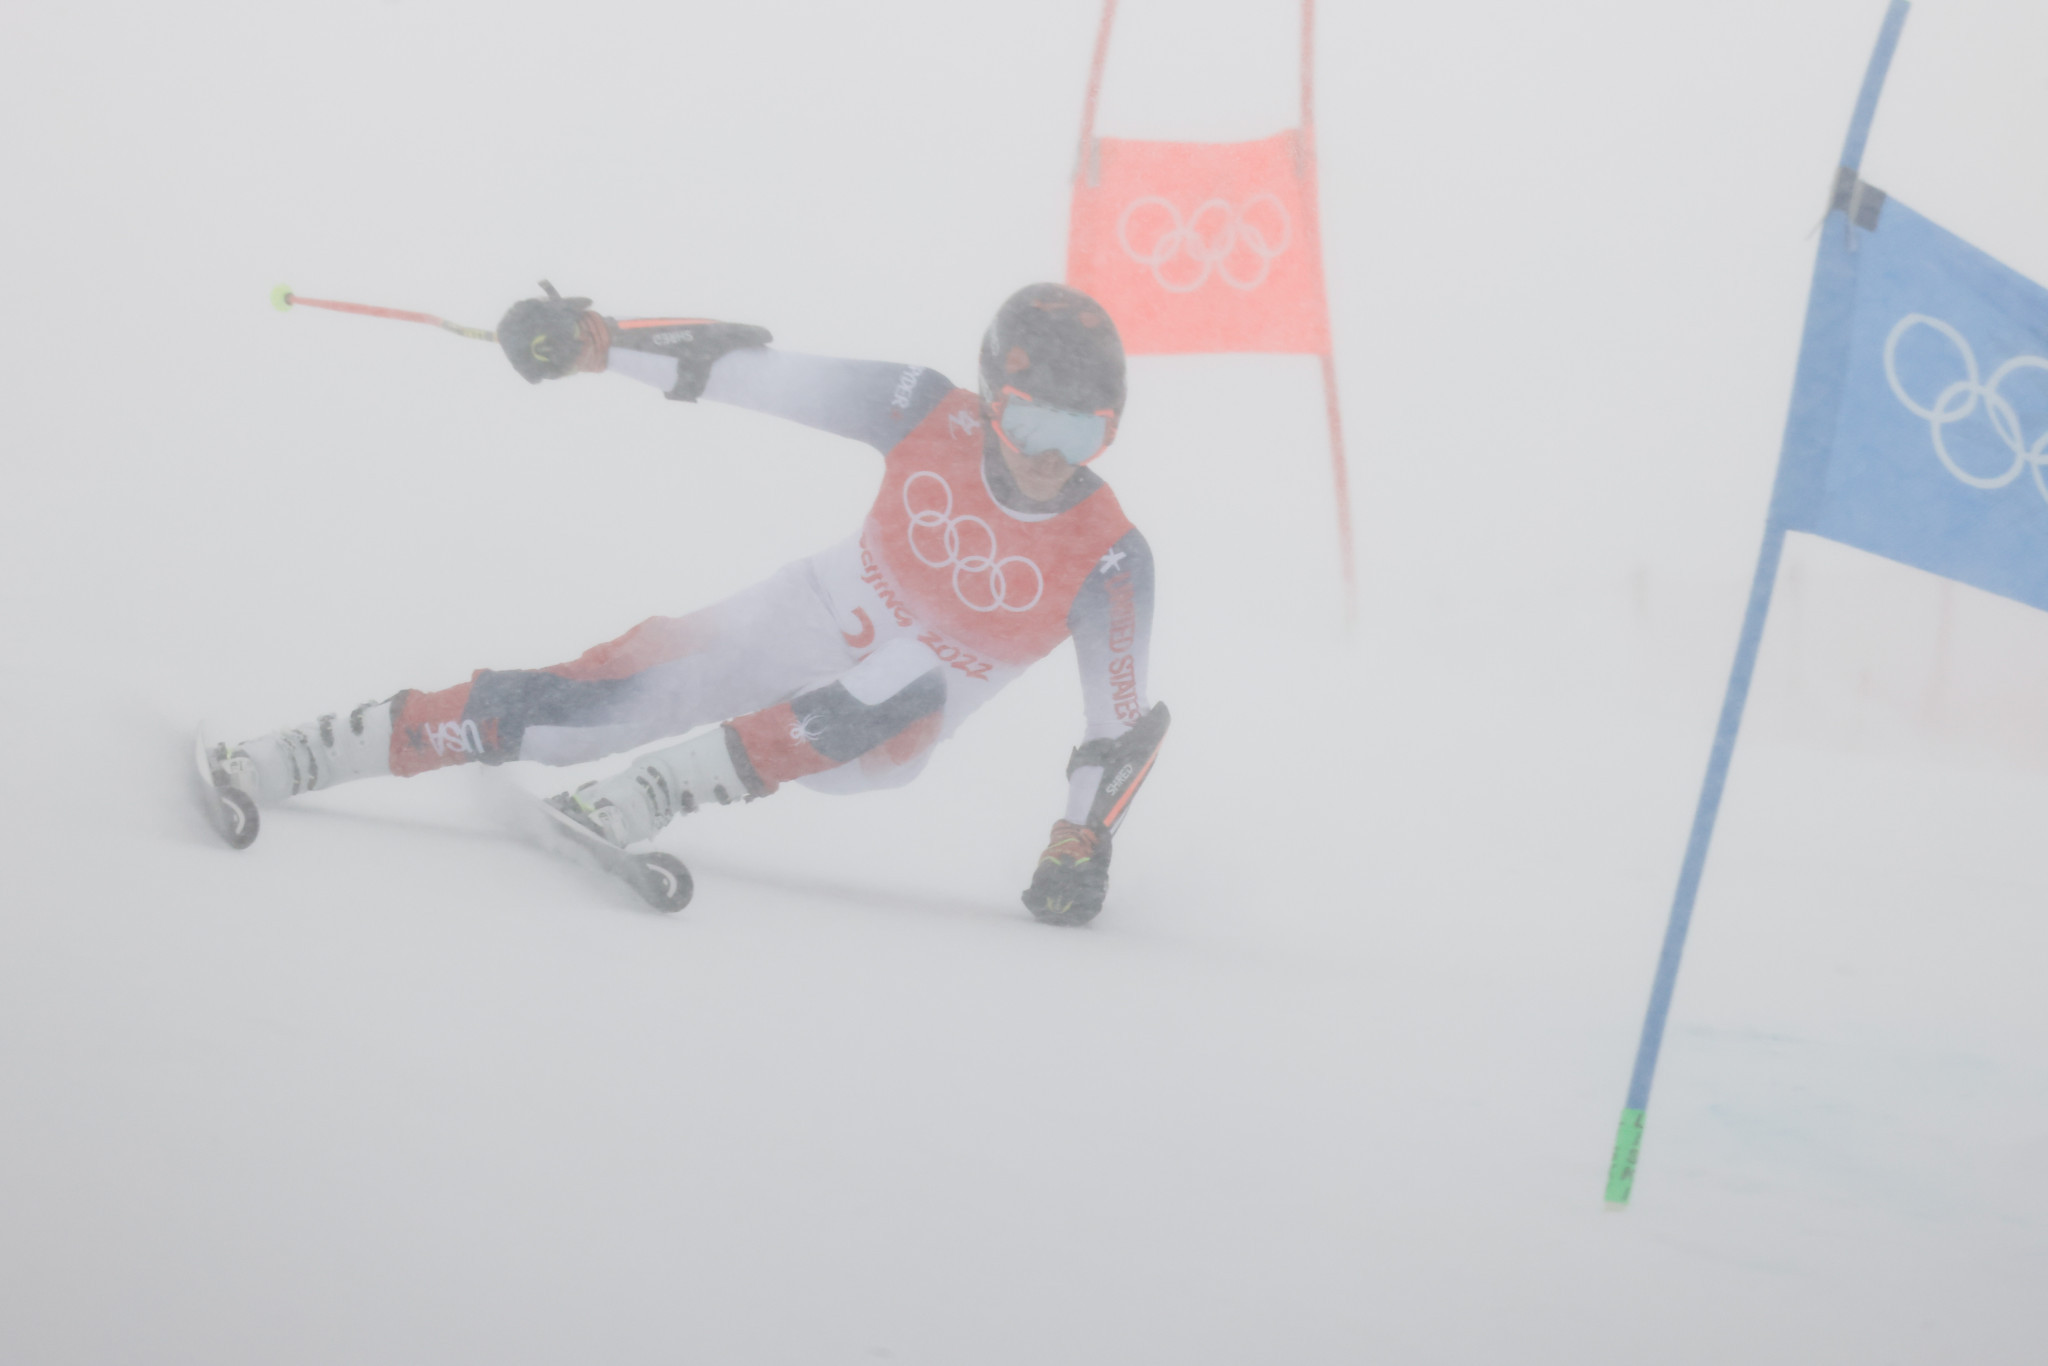 Heavy snow affected competitors in the giant slalom's first leg at Yanqing National Alpine Skiing Centre with several leading medal contenders crashing out ©Getty Images